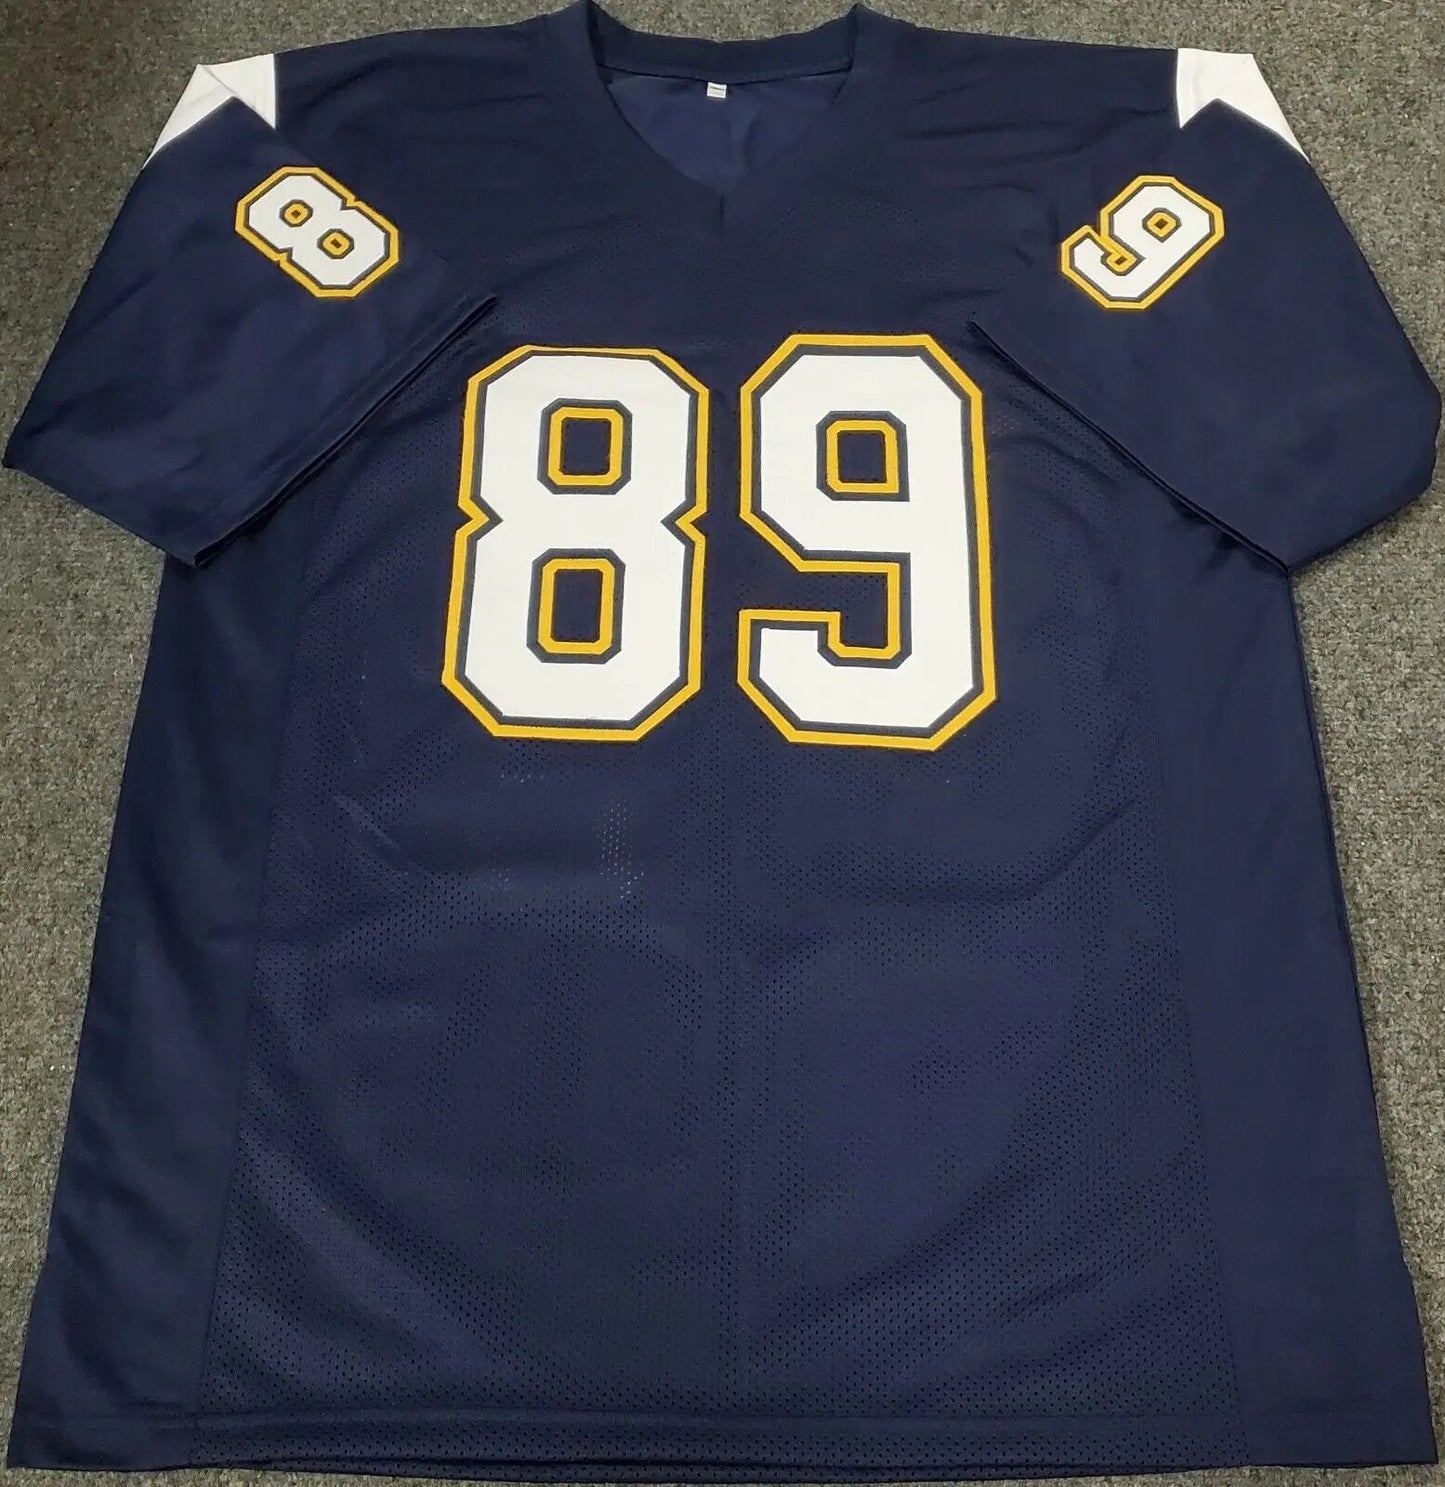 MVP Authentics San Diego Chargers Wes Chandler Autographed Signed Jersey Jsa Coa 143.10 sports jersey framing , jersey framing